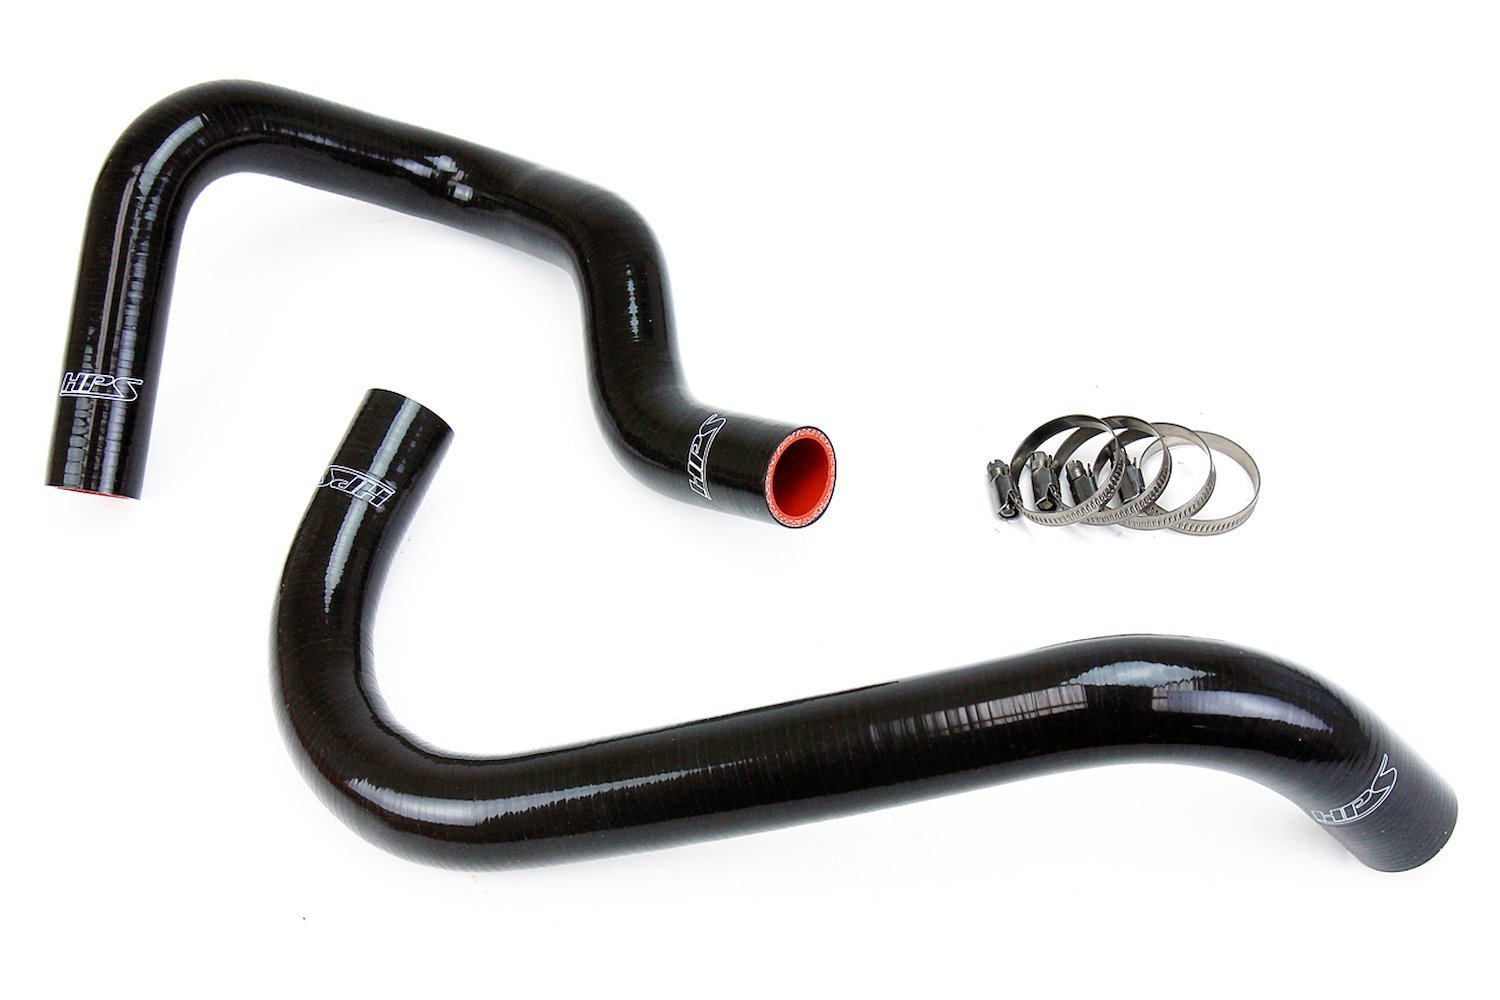 57-1746R-BLK Radiator Hose Kit, High-Temp 3-Ply Reinforced Silicone, Replace OEM Rubber Radiator Coolant Hoses